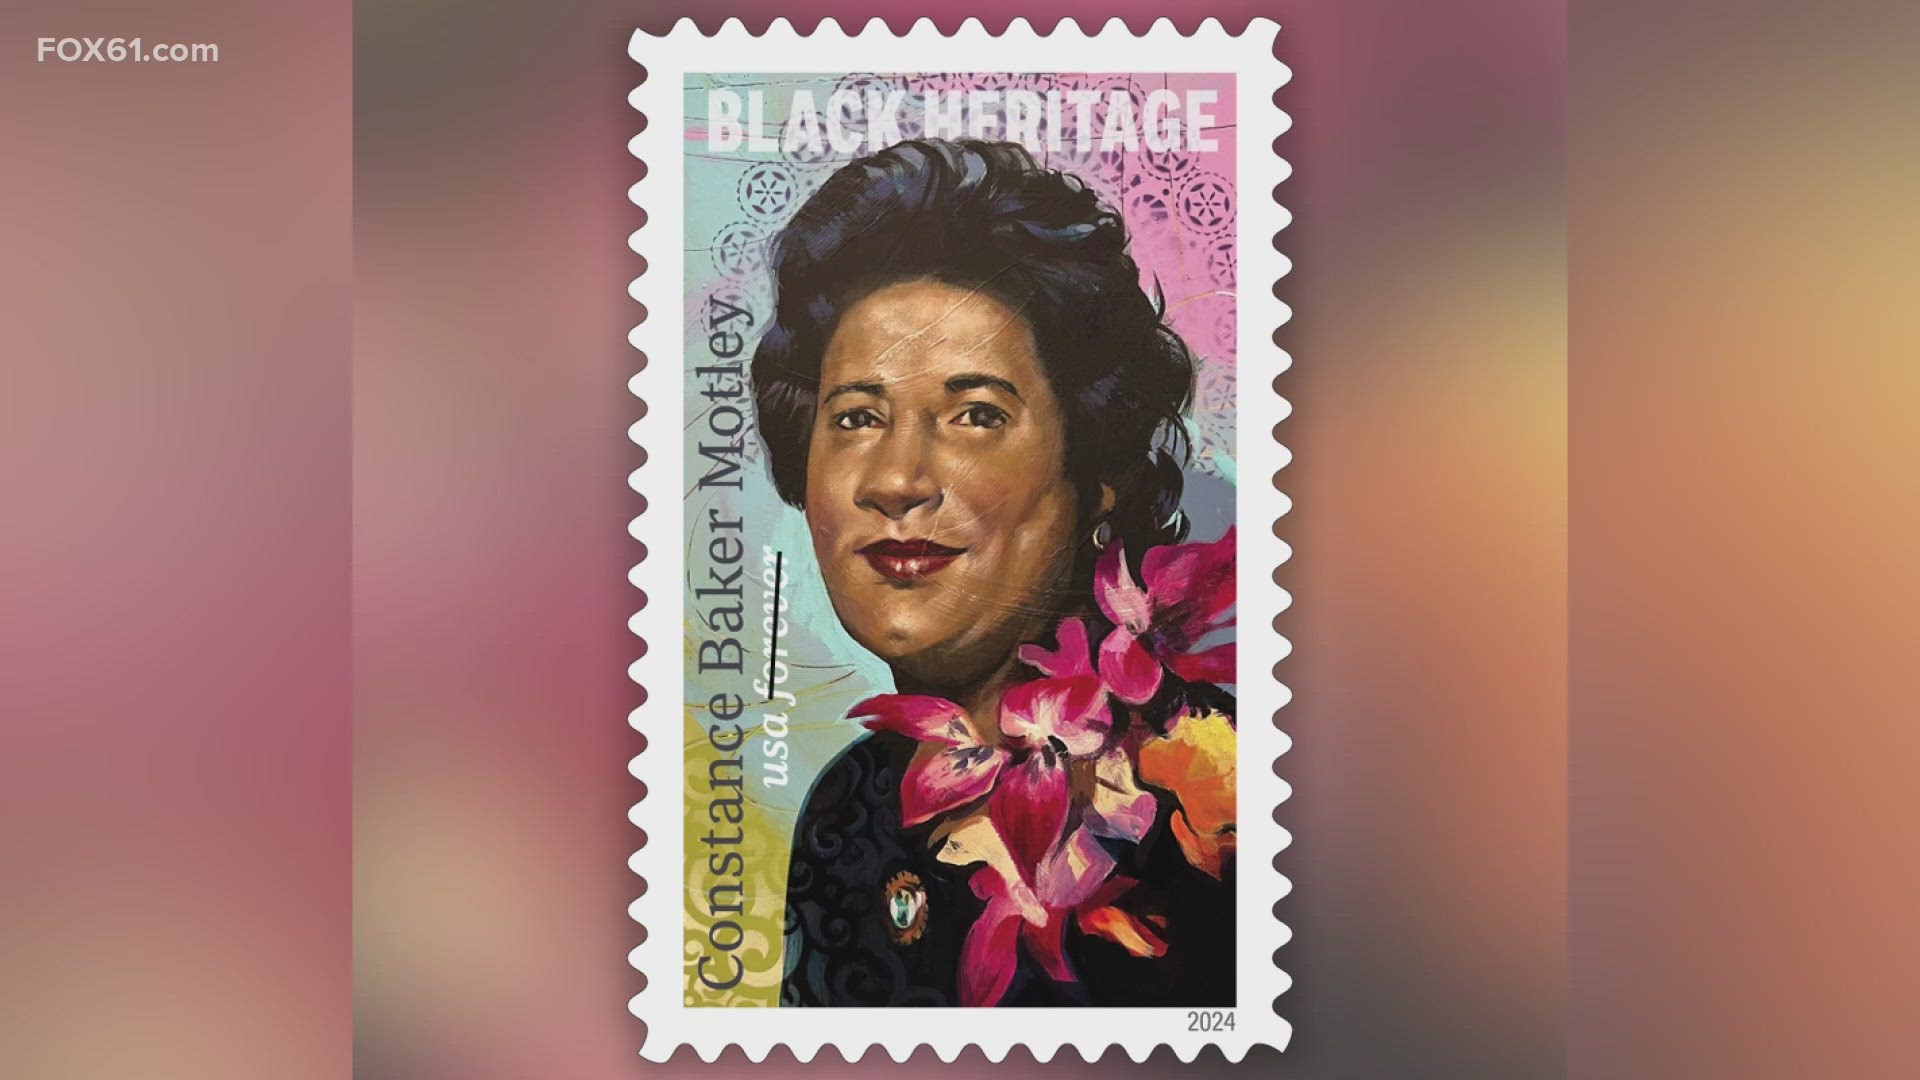 Motley, born in New Haven, is now the 47th honoree in the Black Heritage Stamp series, which features a portrait of Motley by artist Charly Palmer.